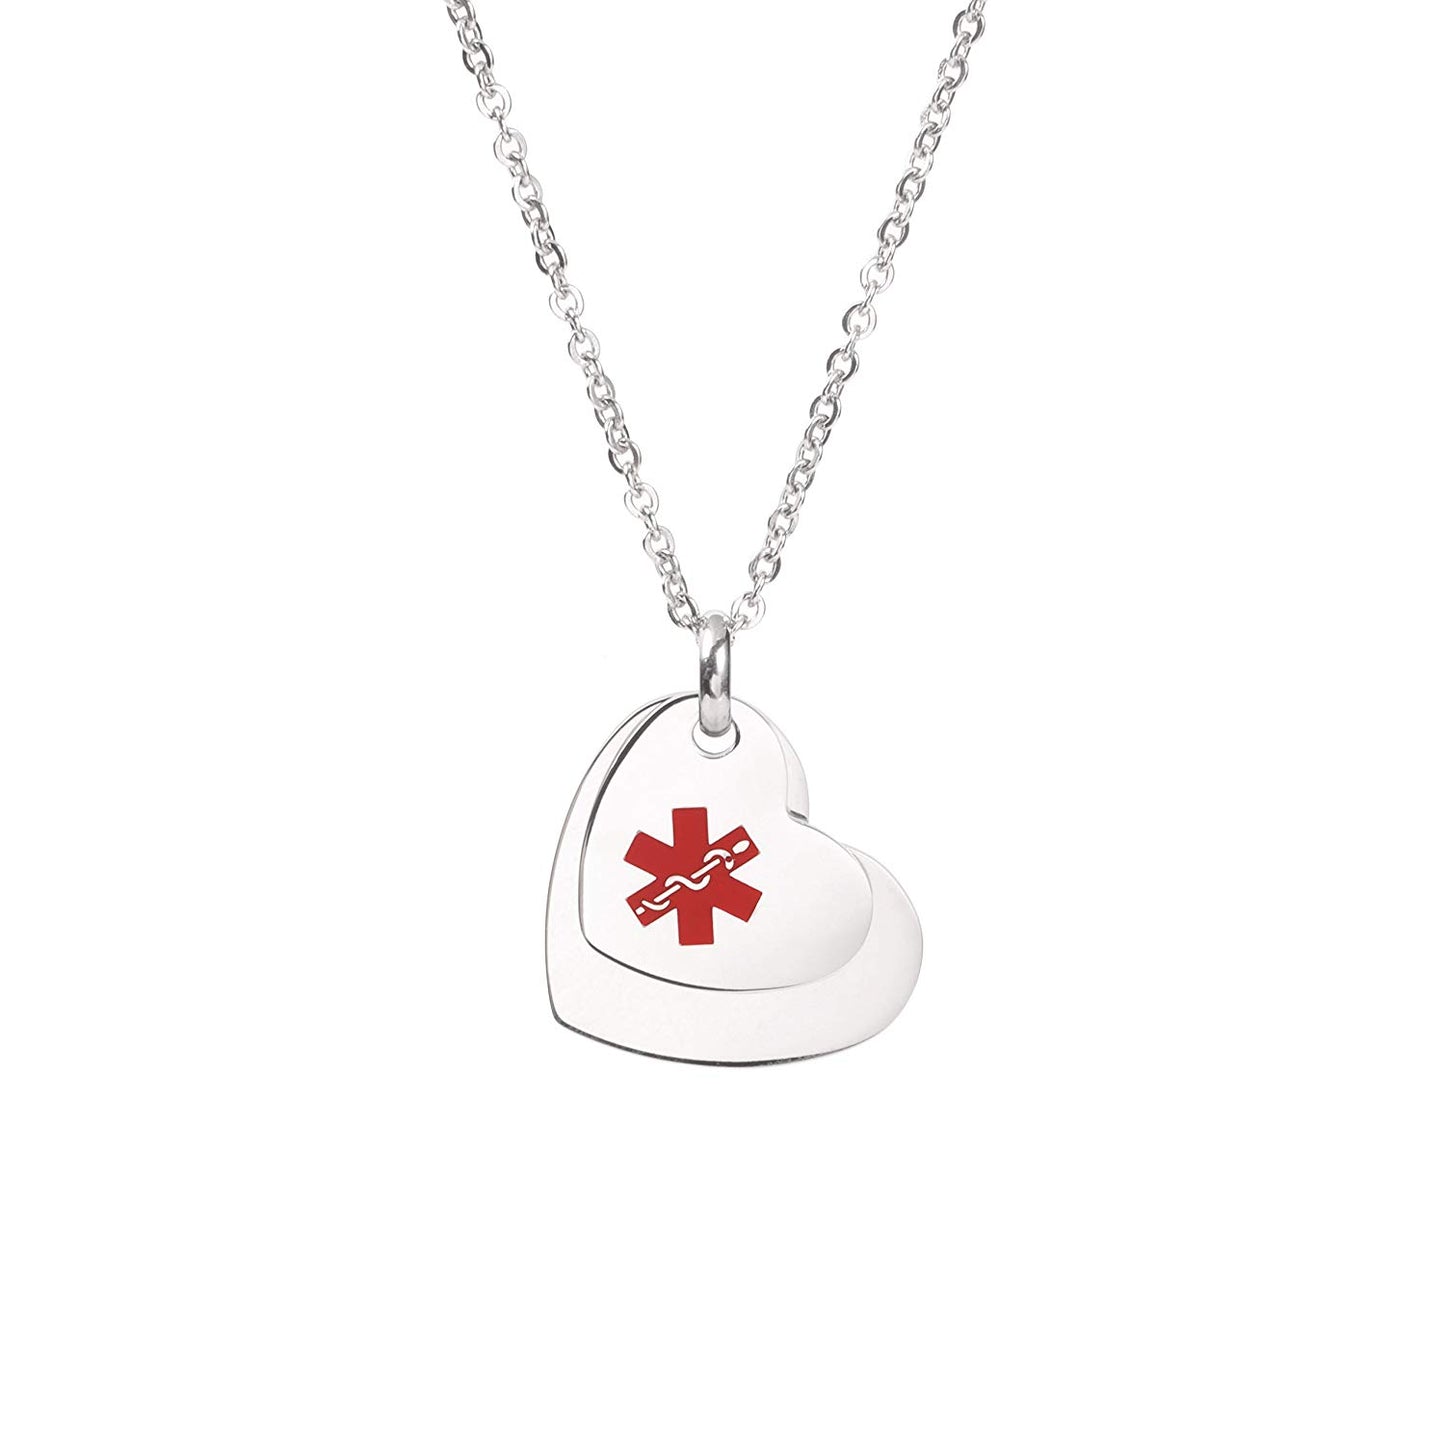 Heart Medical ID Alert Necklaces for Women & Girl with Free Engraving